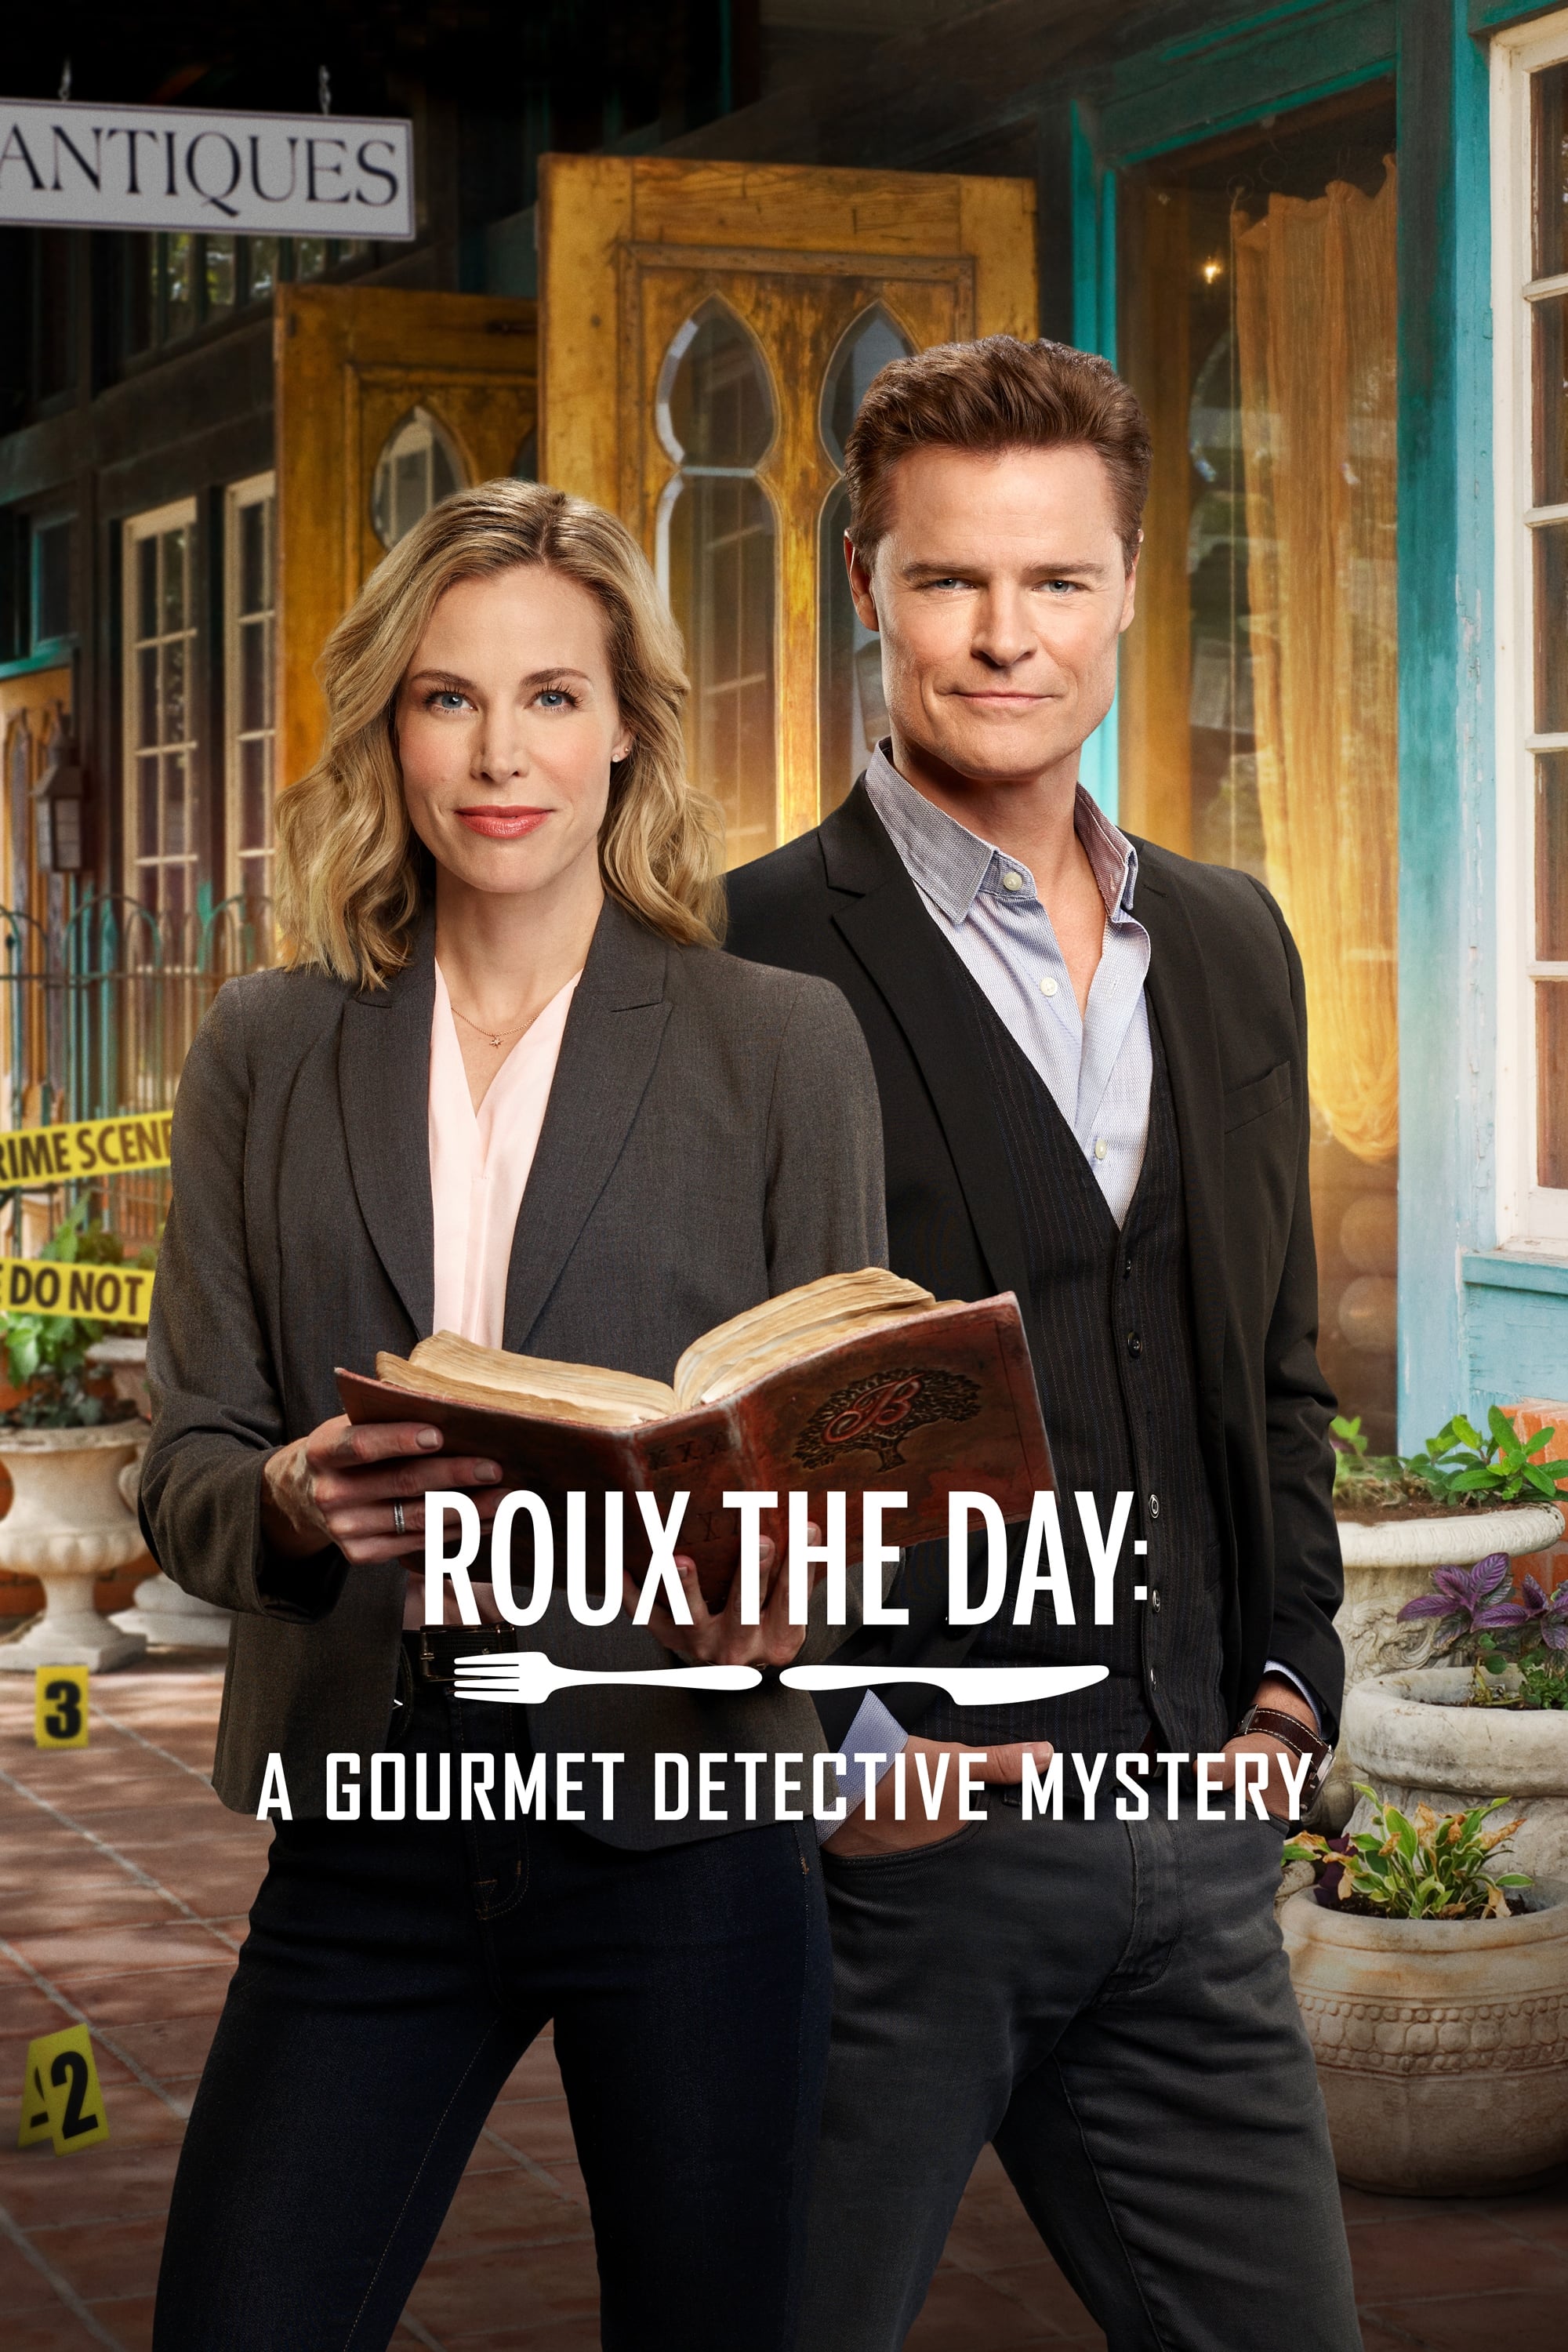 Gourmet Detective Roux the Day (2020)